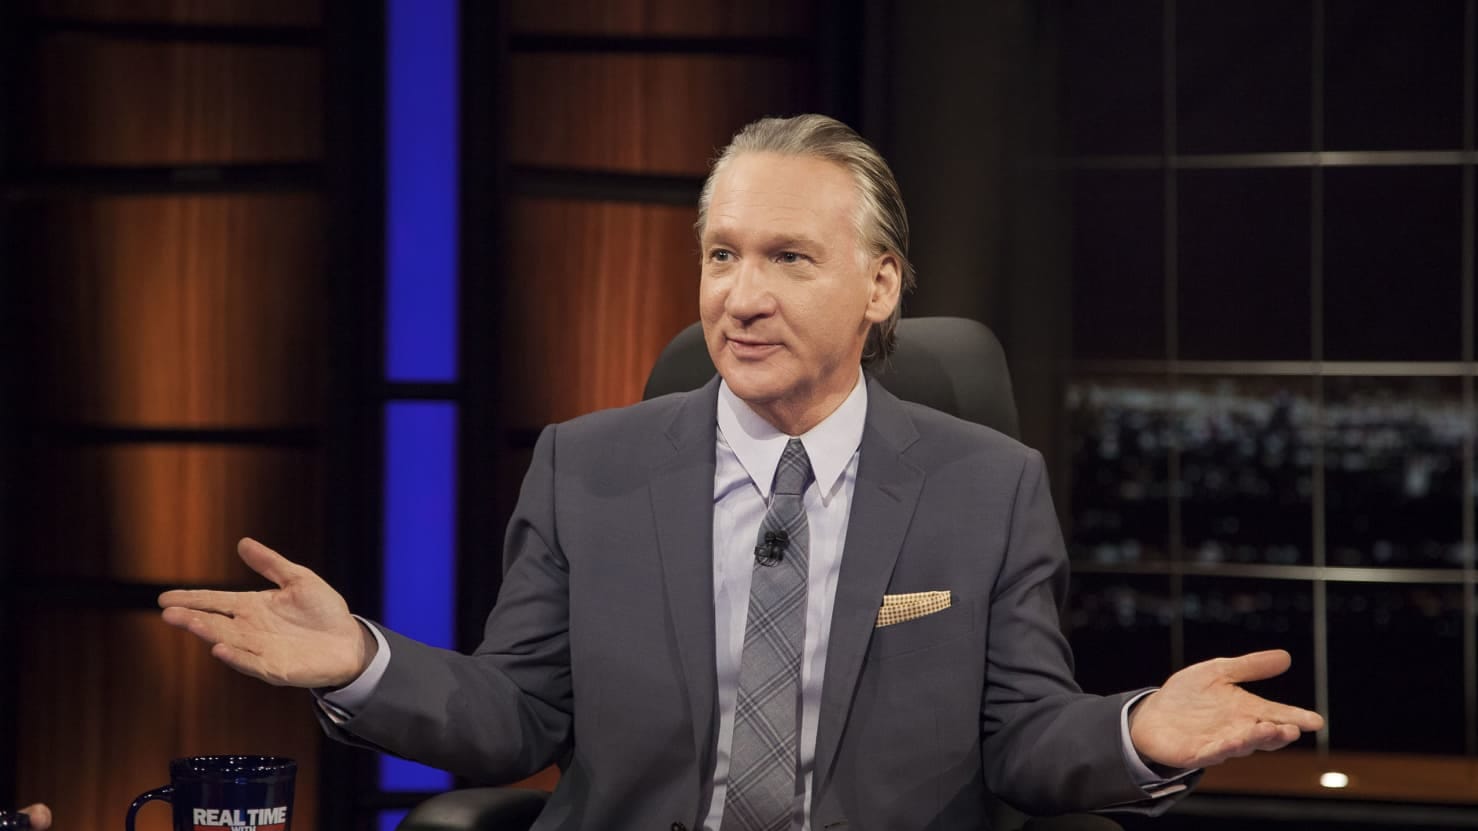 “I’m Over COVID, What the F**k Is the Use of Boosters?” – Bill Maher Goes Off on Medical Establishment, Experimental Vaccines in Latest Interview